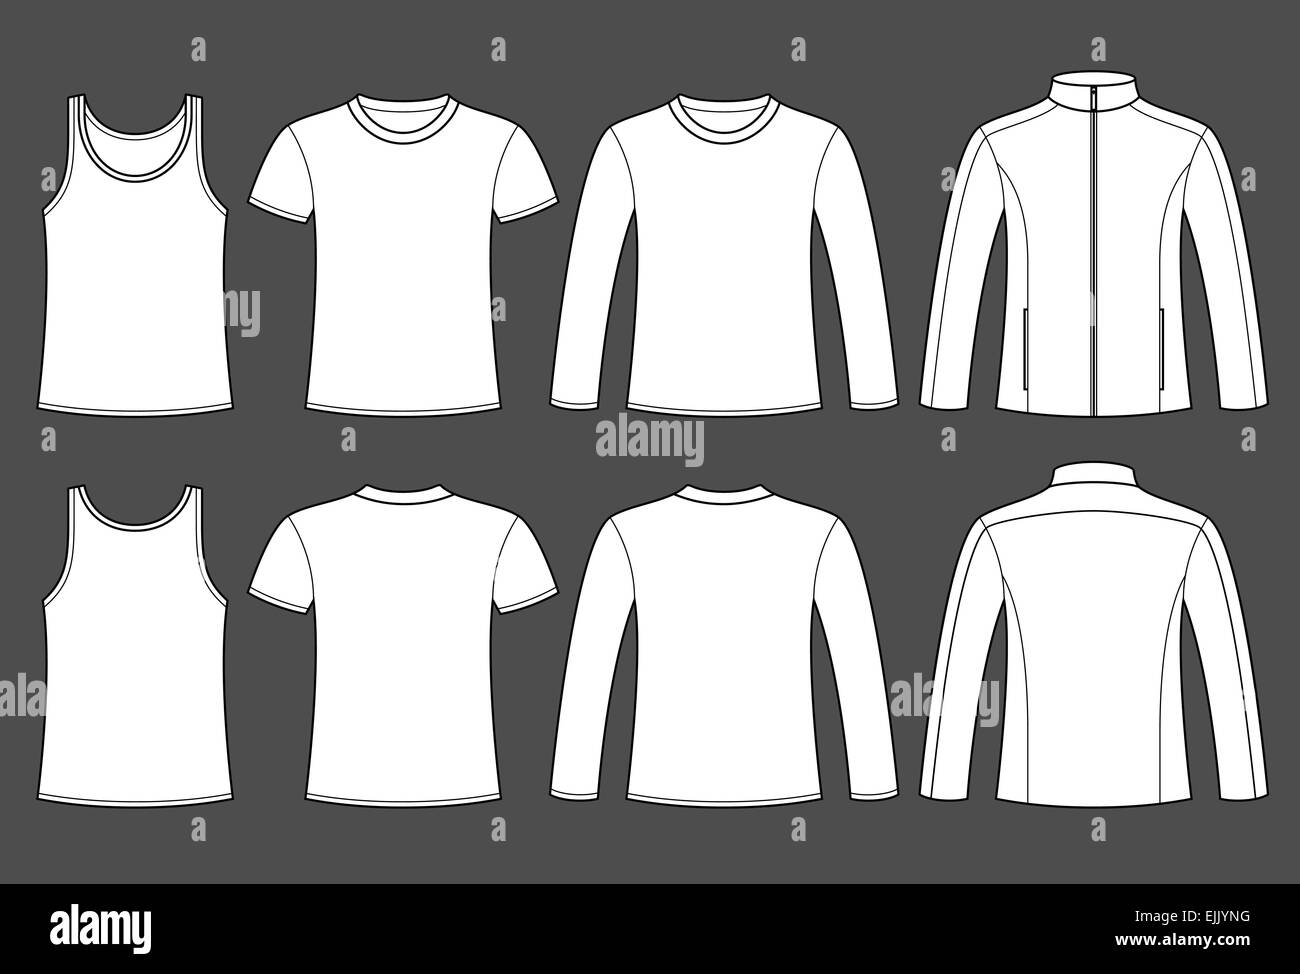 Singlet, T-shirt, Long-sleeved T-shirt and Jacket template - front and back on dark background Stock Photo